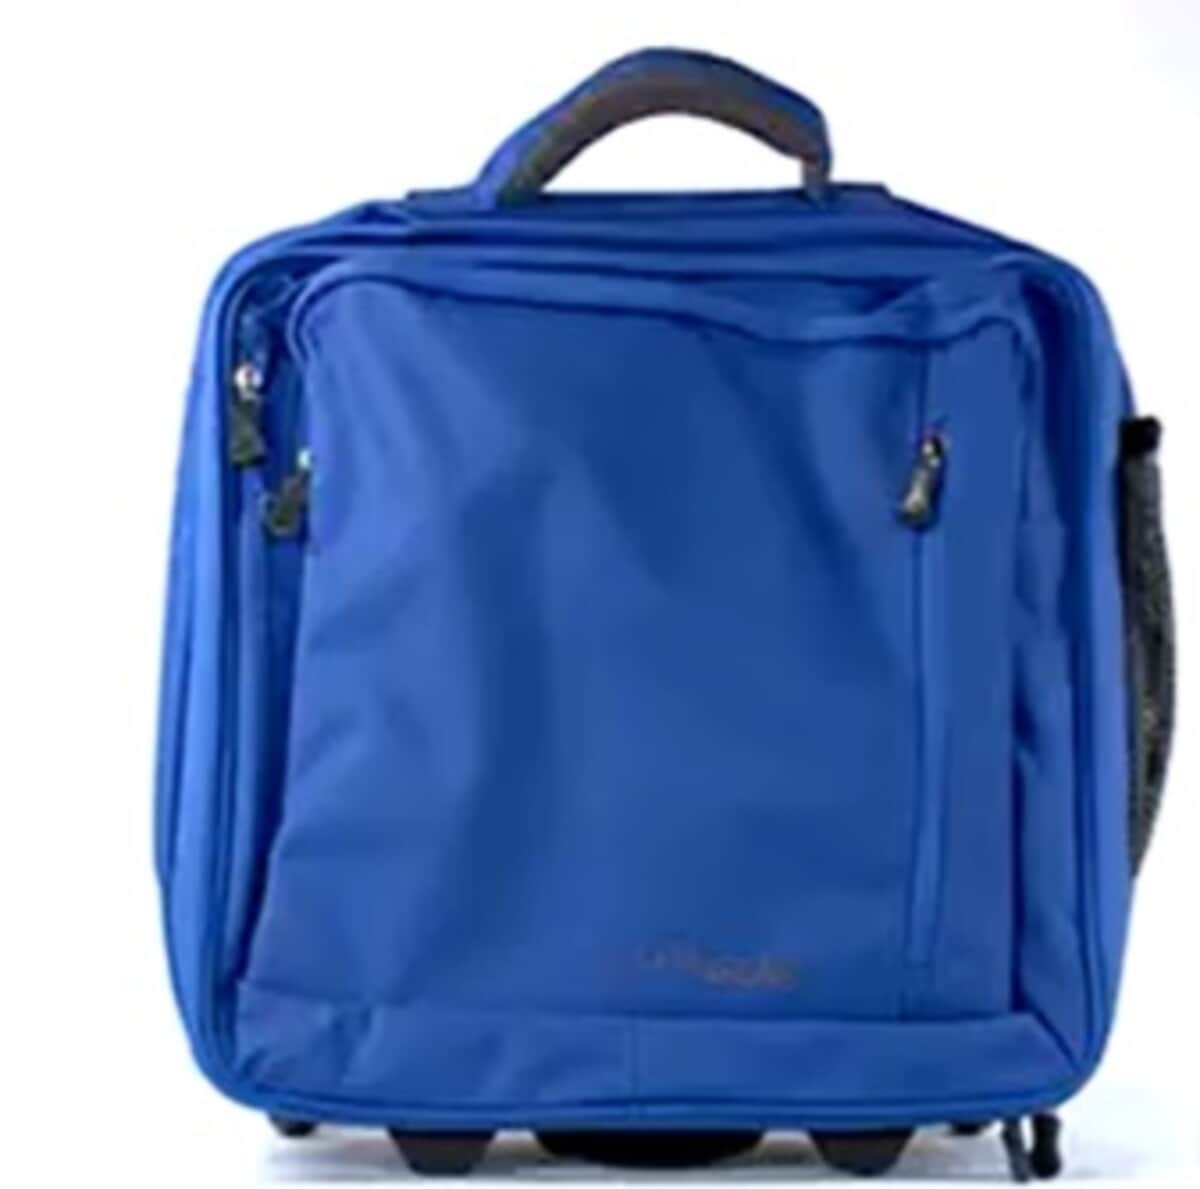 Lite Gear Hybrid Rolling Tote Luggage - Blue image number 0